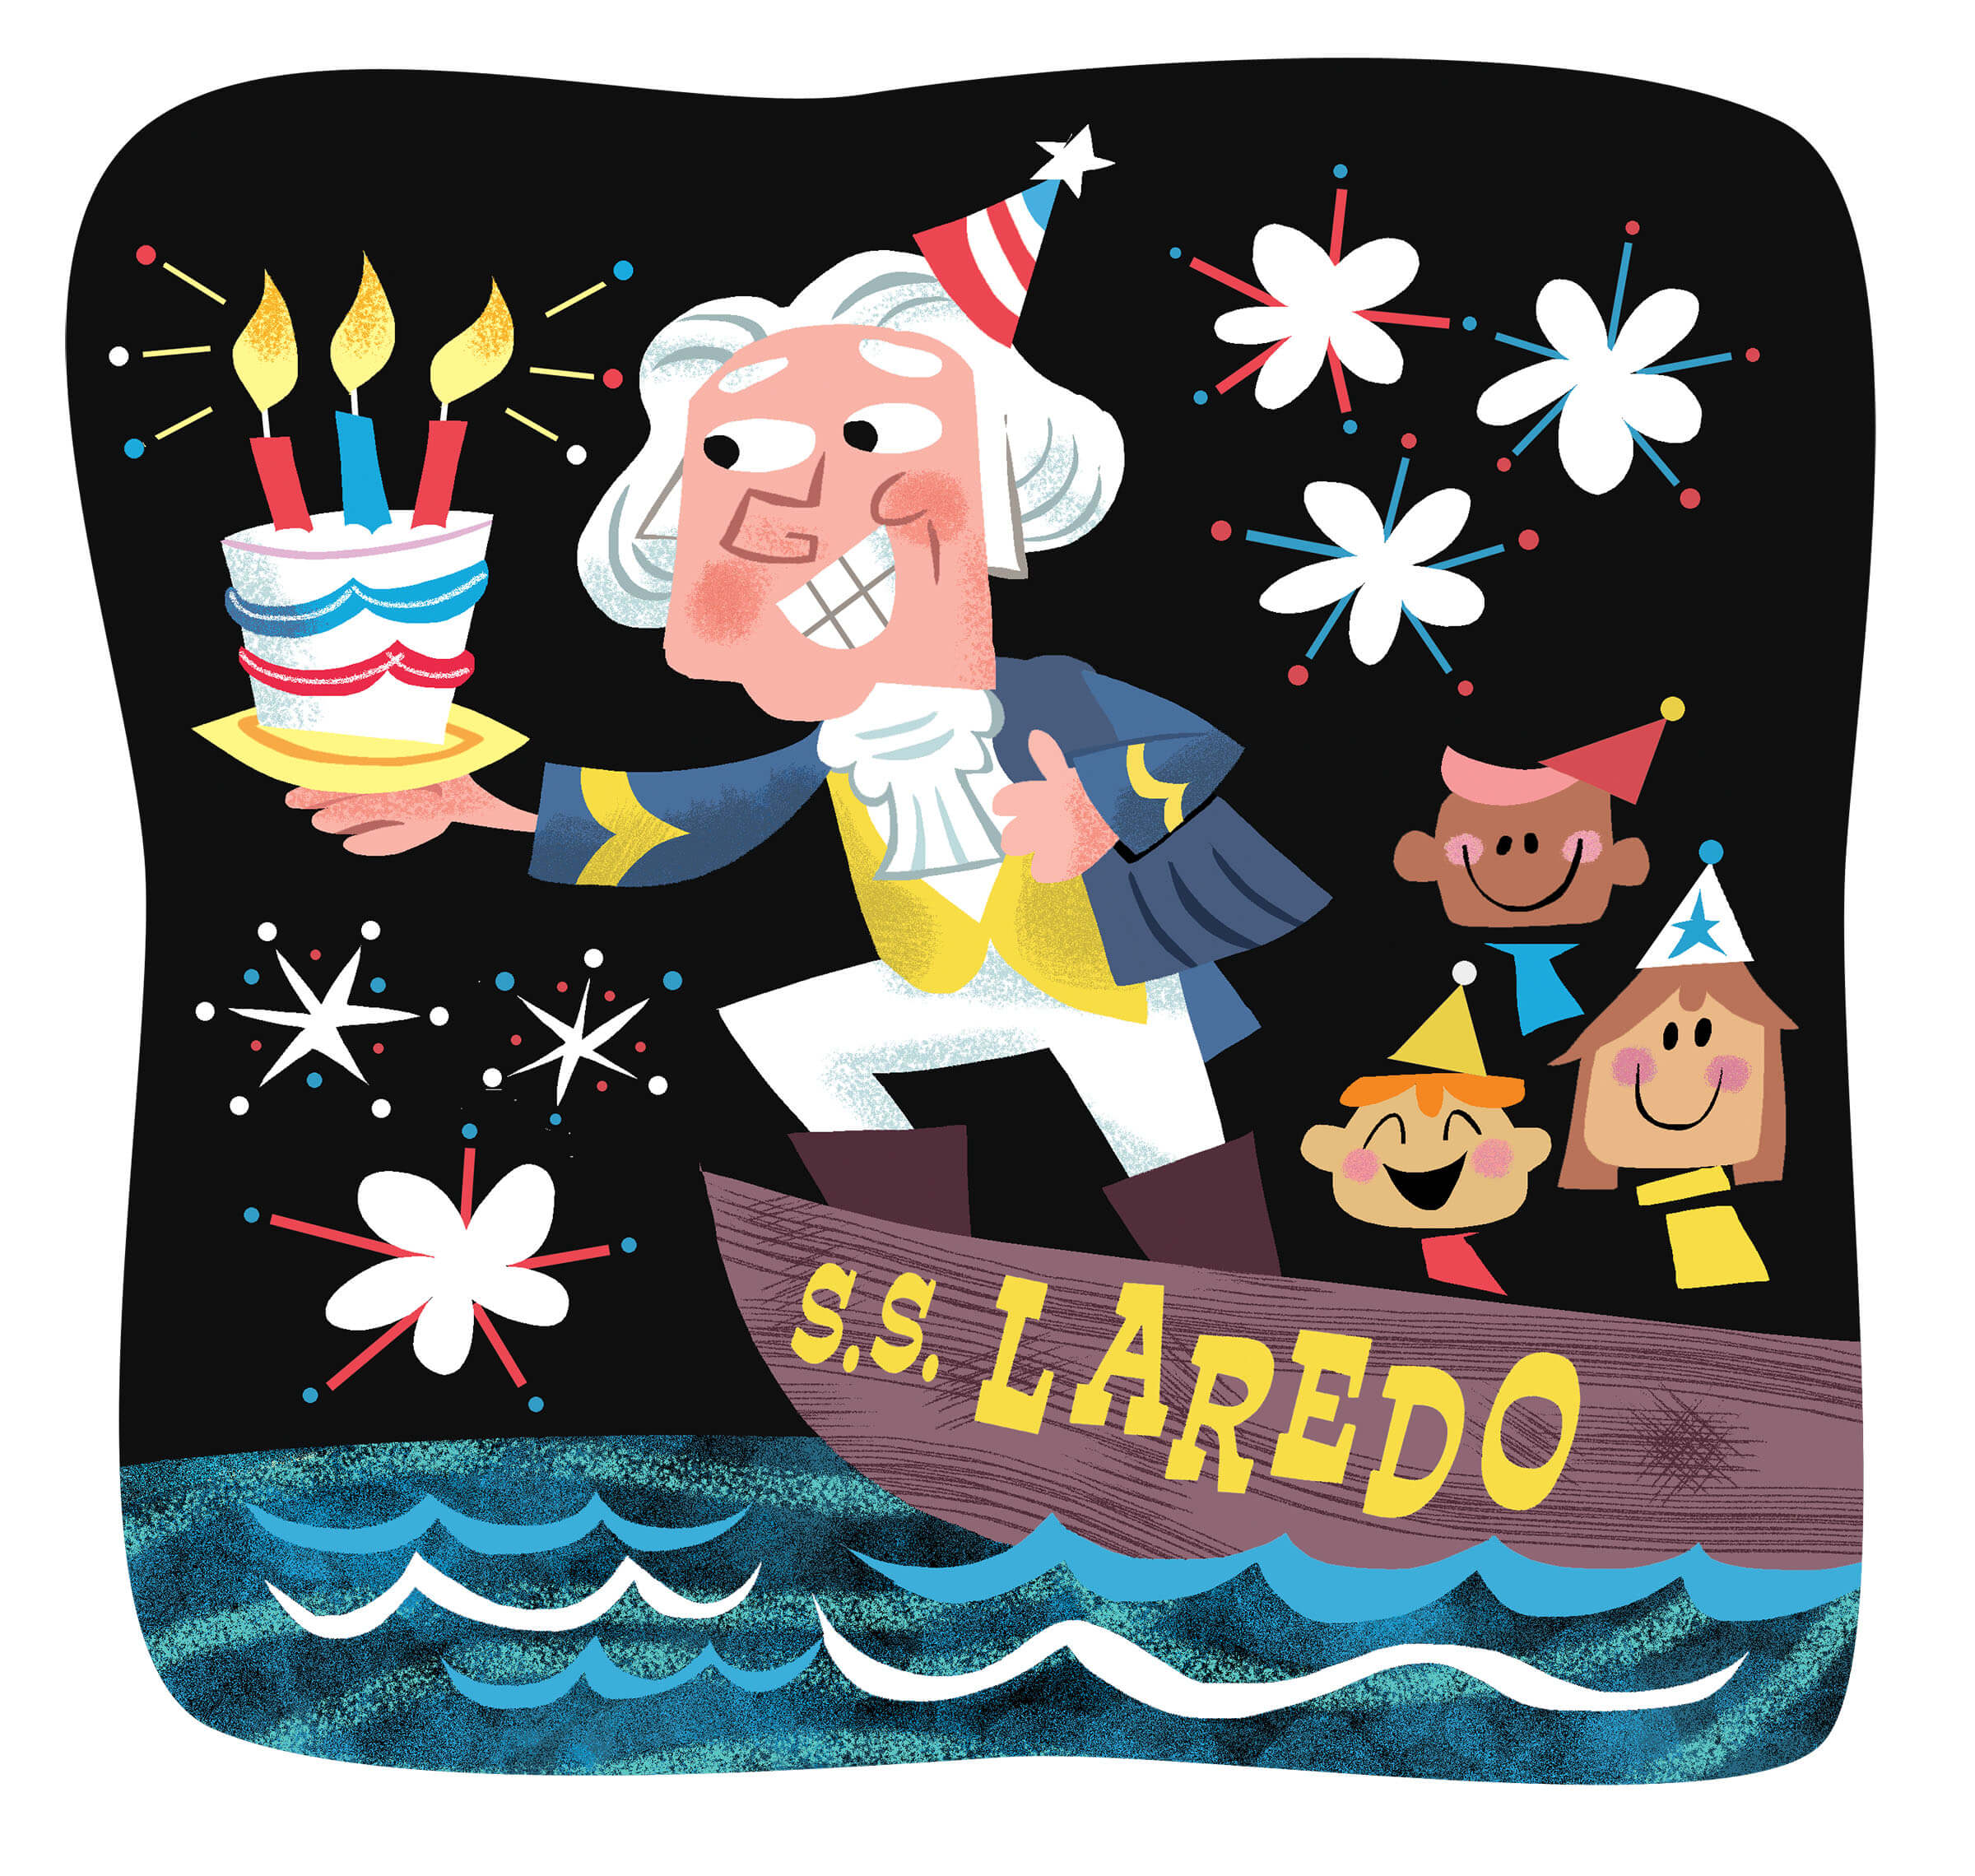 A cartoon illustration of George Washington leaning out of a boat holding a birthday cake with red, white and blue fireworks in the background